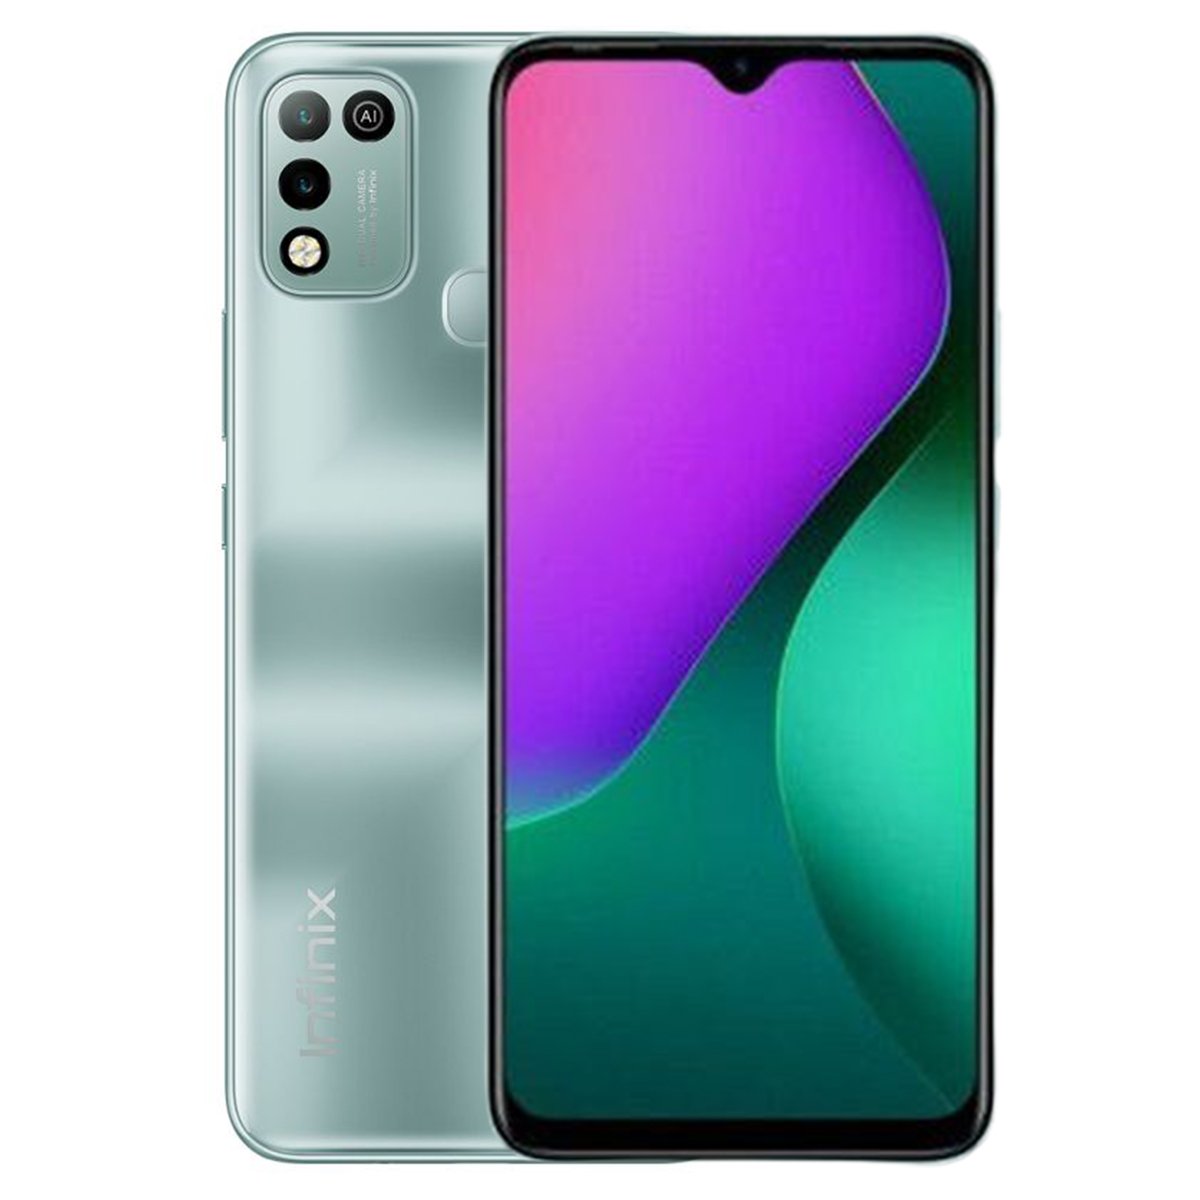 Infinix Note 10 Pro : Infinix Note 10 Pro to debut on May 13, poster